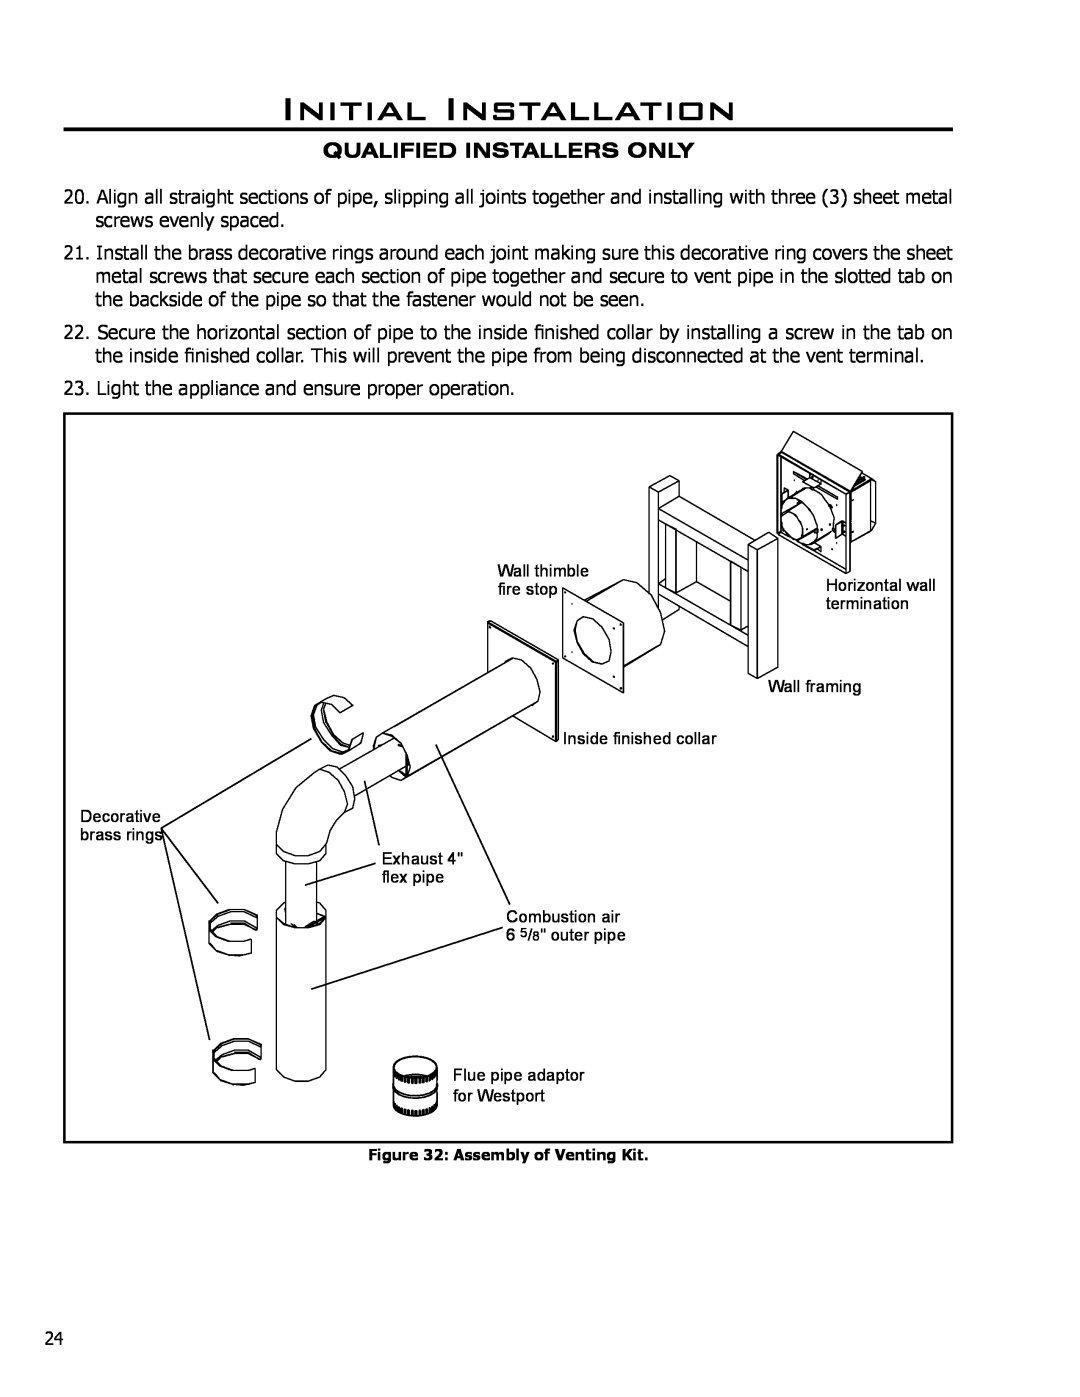 Enviro C-10794 owner manual Initial Installation, Qualified Installers Only, Wall thimble 